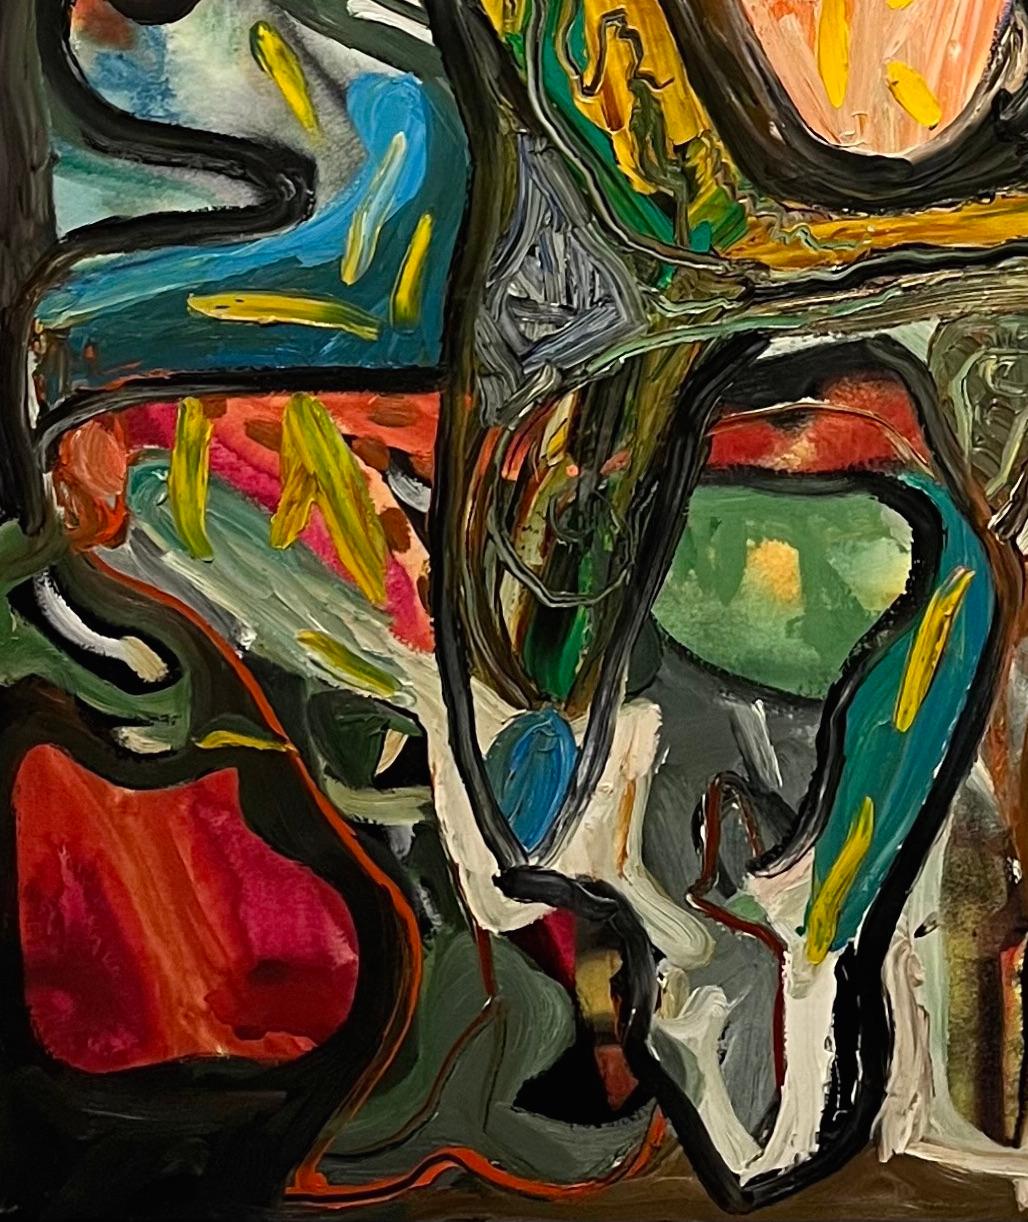 This abstract oil painting by late Houston artist Dick Wray expresses a striking kinetic energy. Thick layers of paint foster a remarkable tactility commonly found in Dick Wray’s artwork. The treatment of the oil reflects a tendency toward impulse